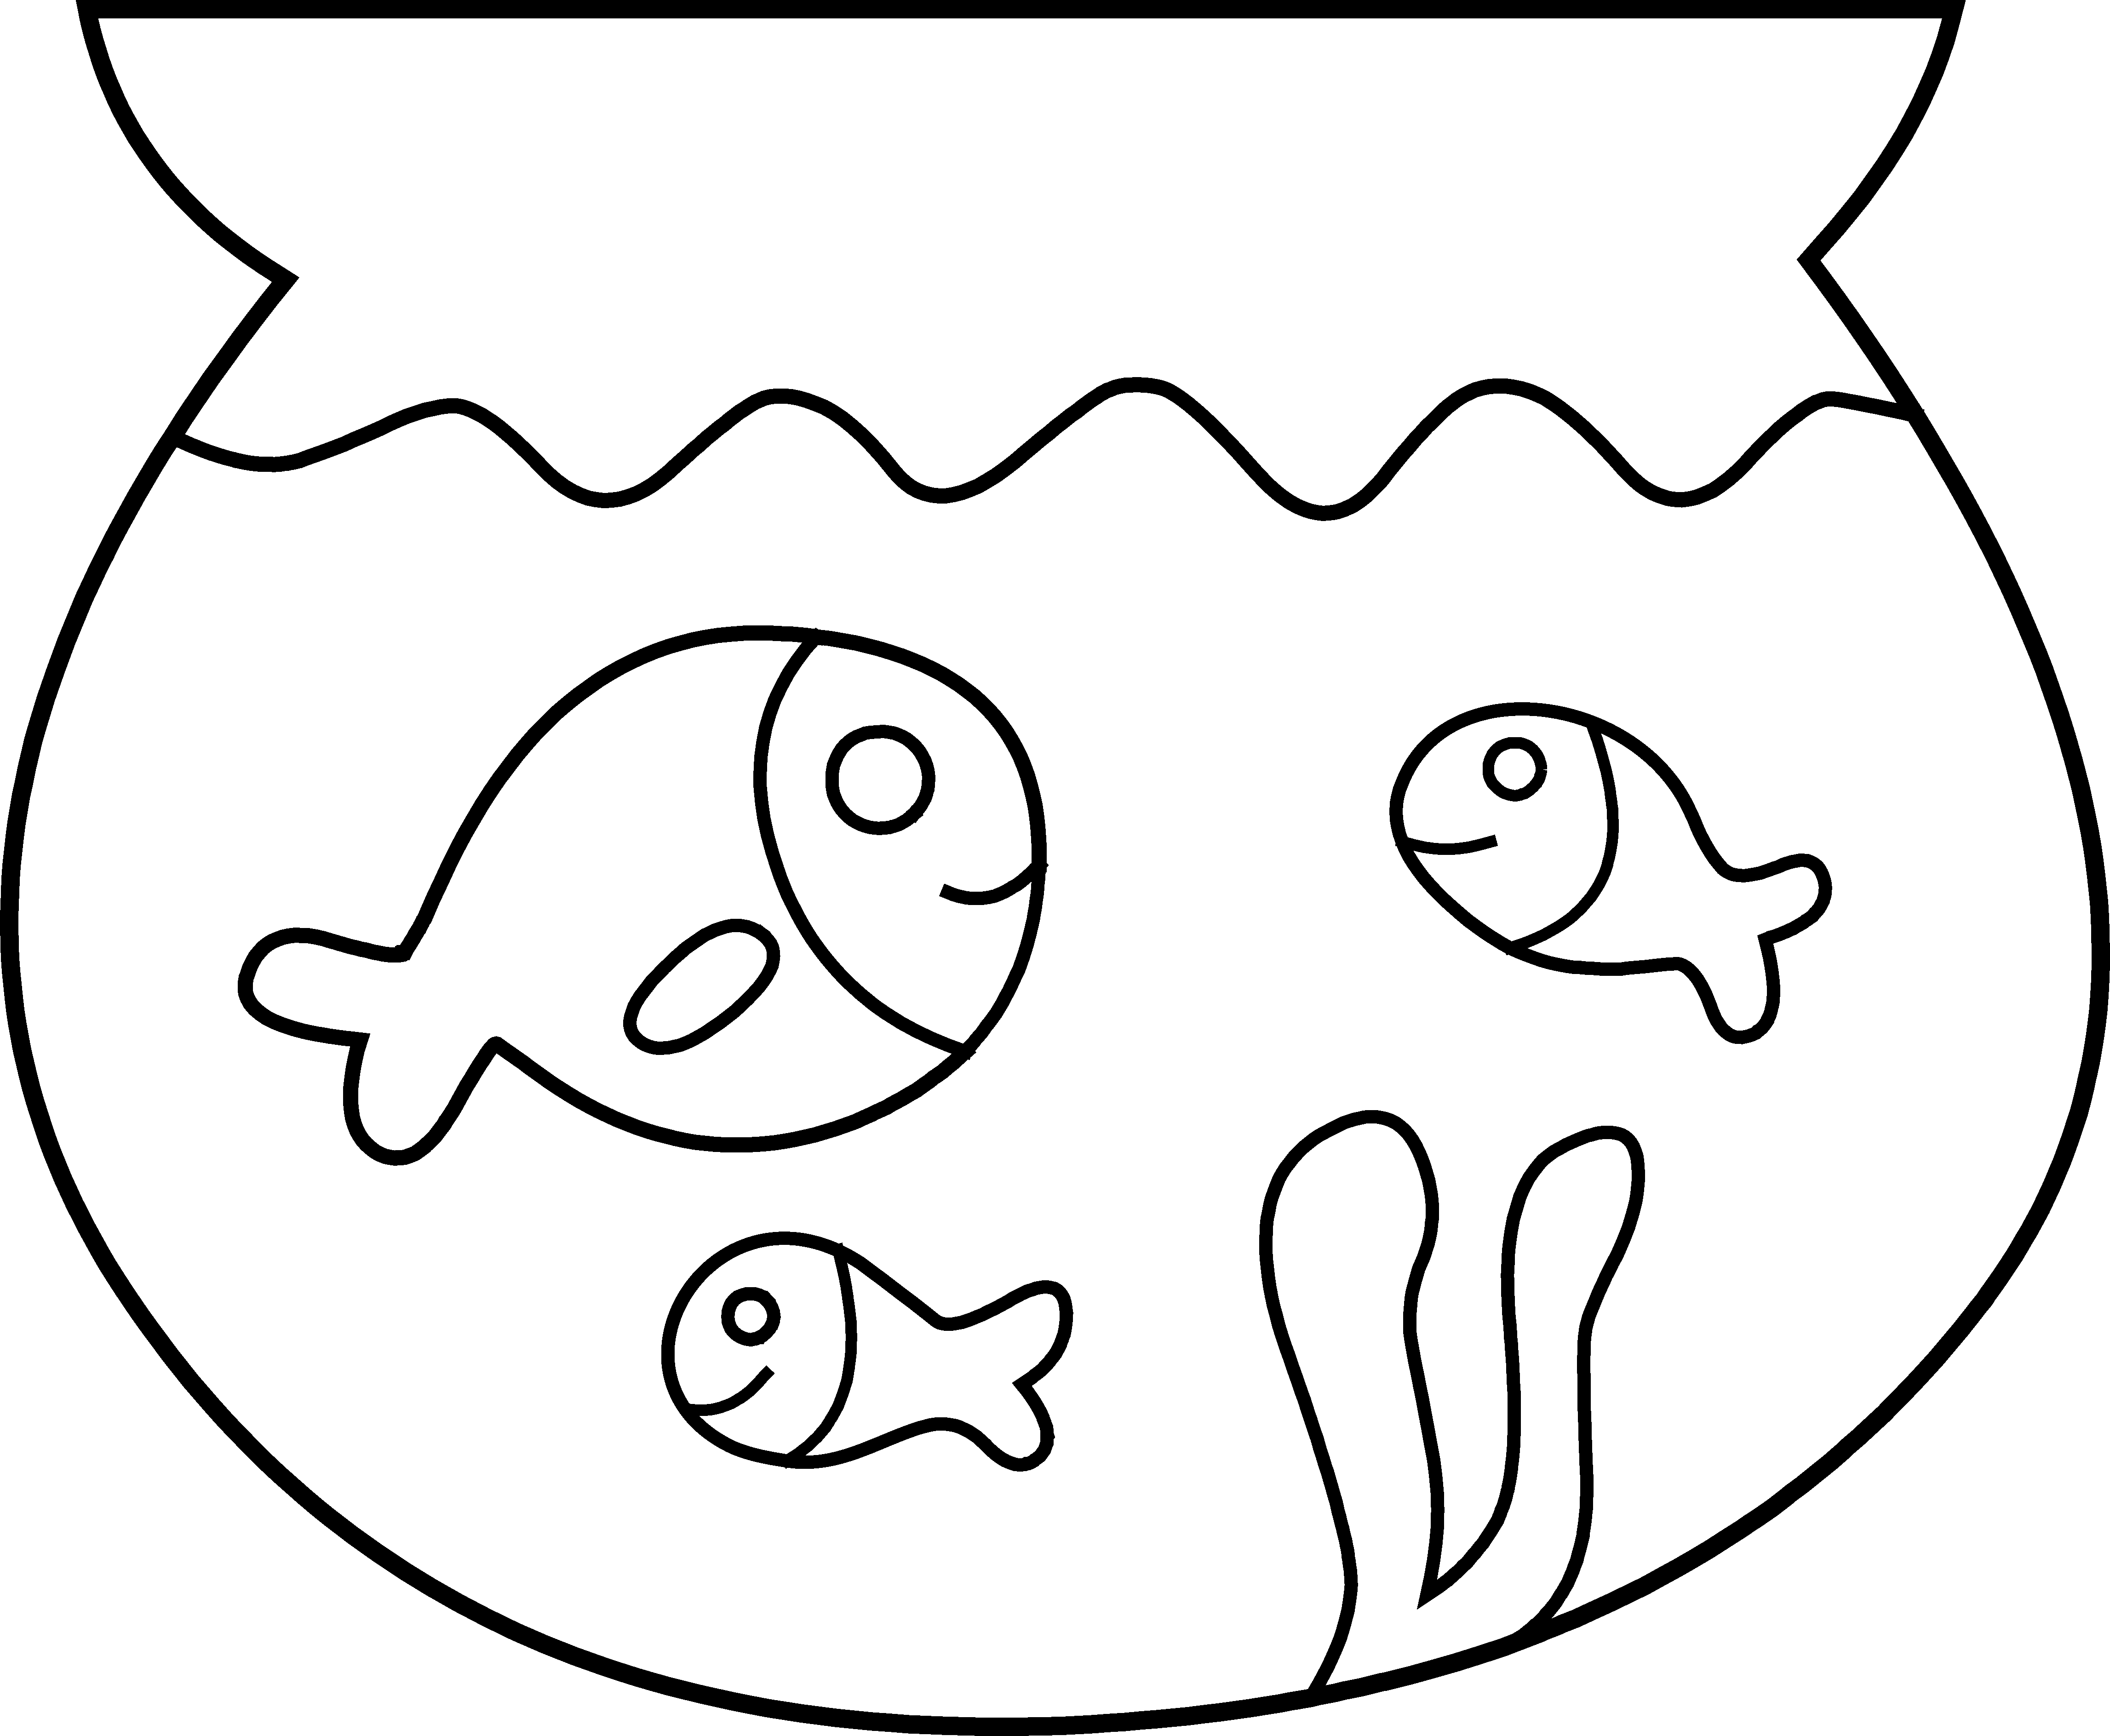 Cliparts free download clip. Clipart fish easy